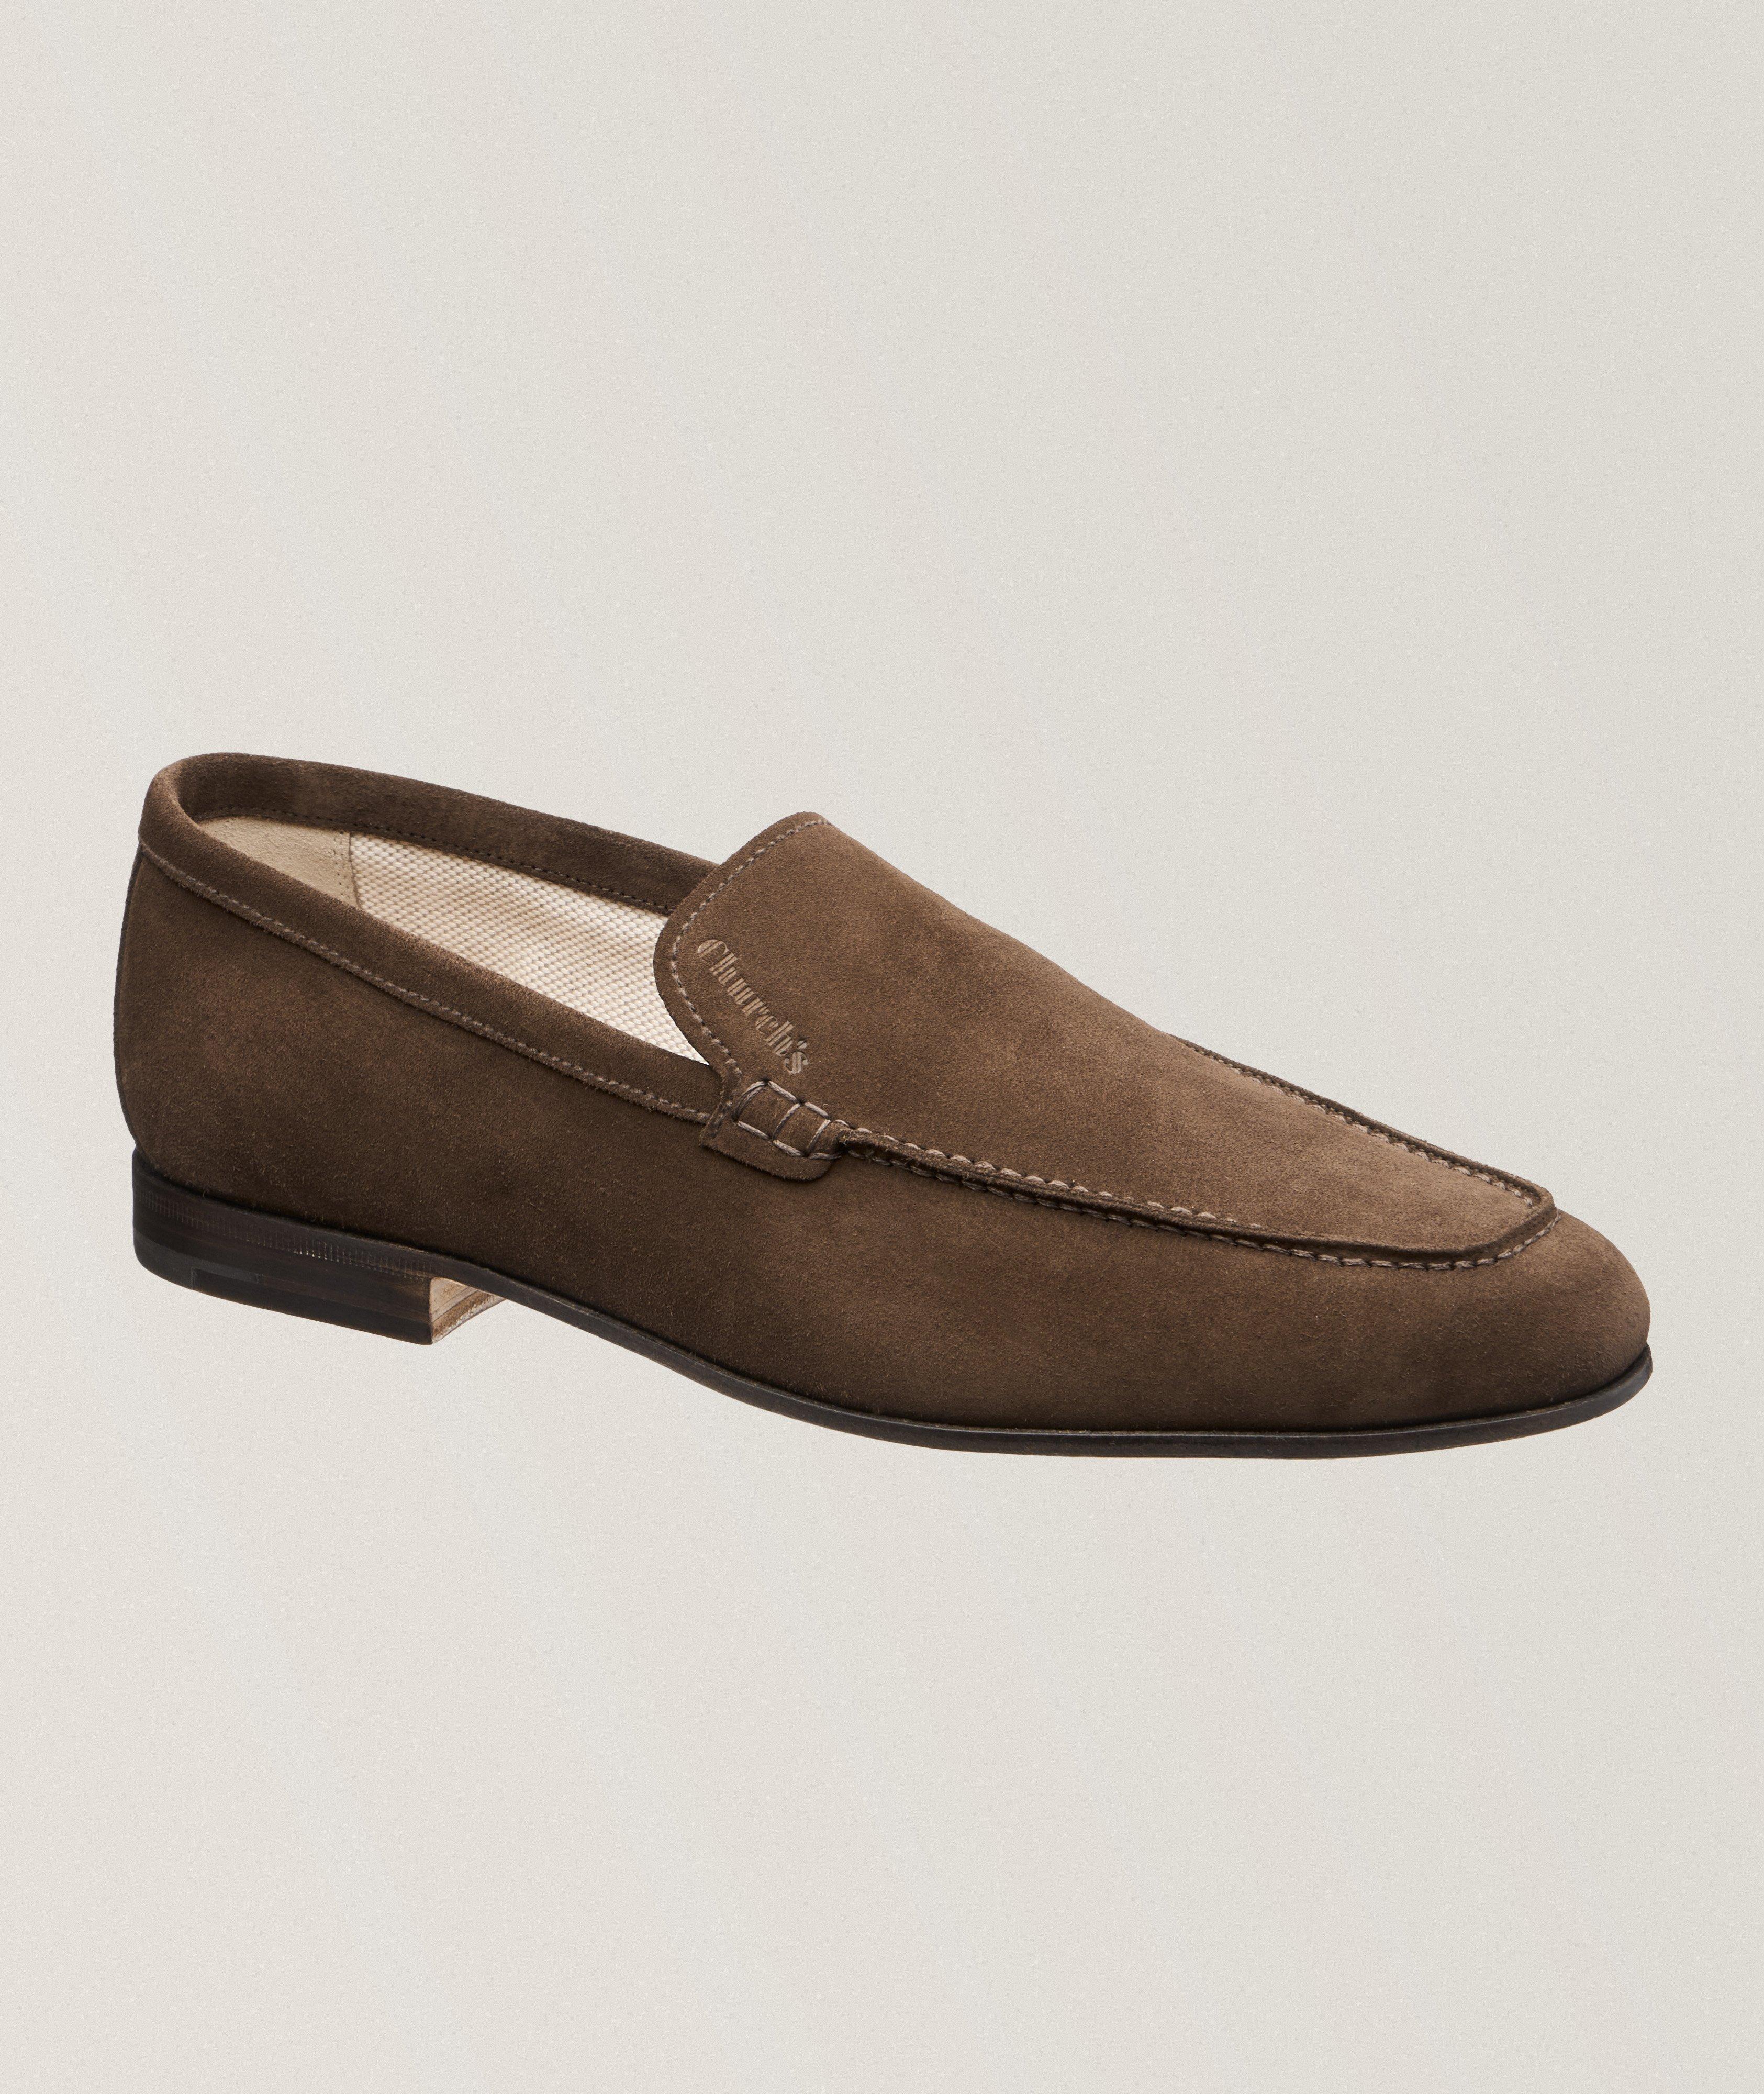 Margate Suede Loafers image 0